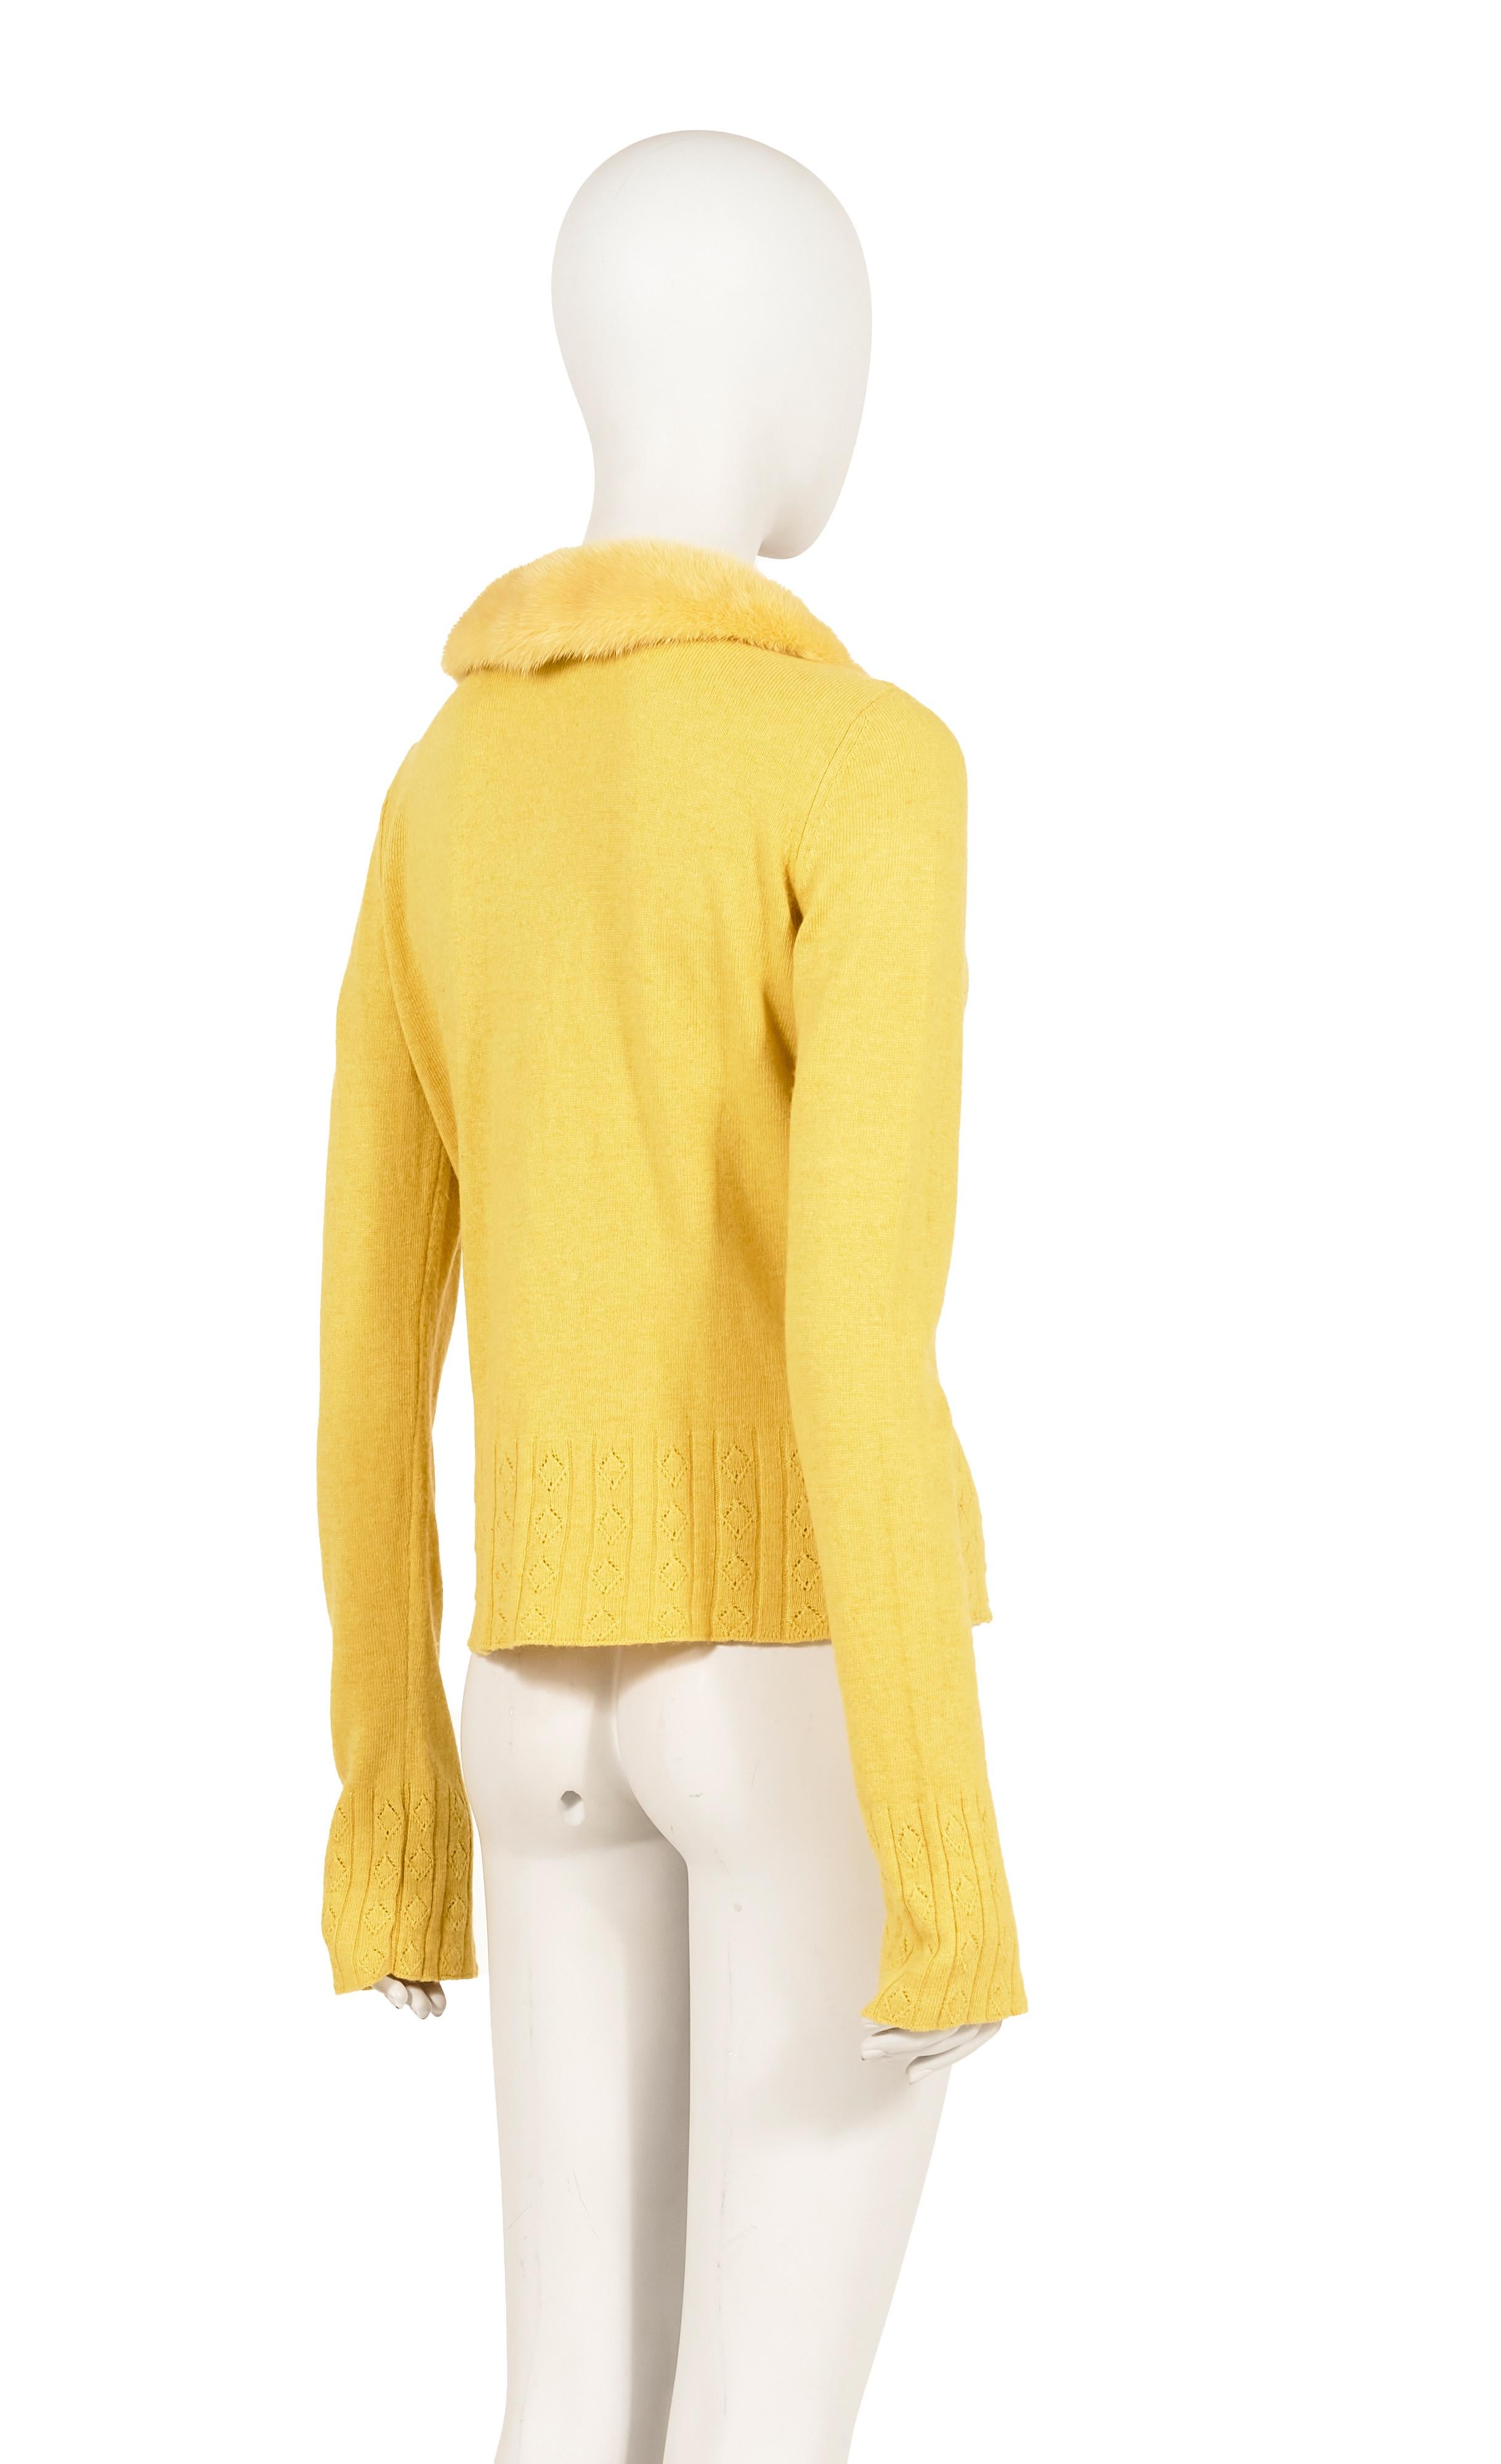 - Blumarine by Anna Molinari
- Sold by Gold Palms Vintage 
- Spring Summer 2005 collection
- Yellow Knit wool cardigan
- Gold-toned monogram logo rhinestone motif
- Yellow mink fur collar
- Size: IT 46 

Measurements (laid flat)

Shoulder to